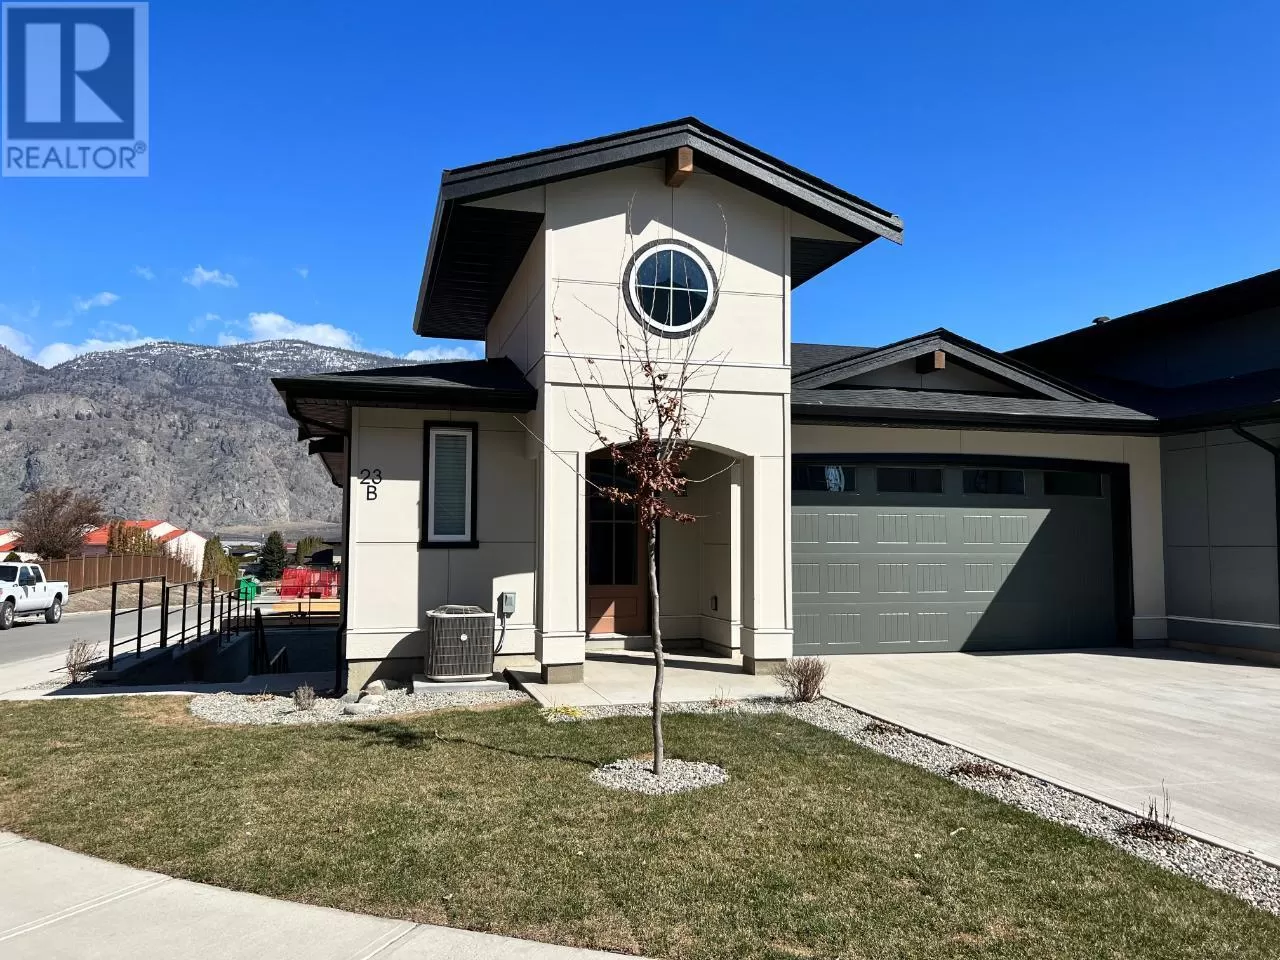 Row / Townhouse for rent: 8000 Vedette Drive Unit# 23, Osoyoos, British Columbia V0H 1V2